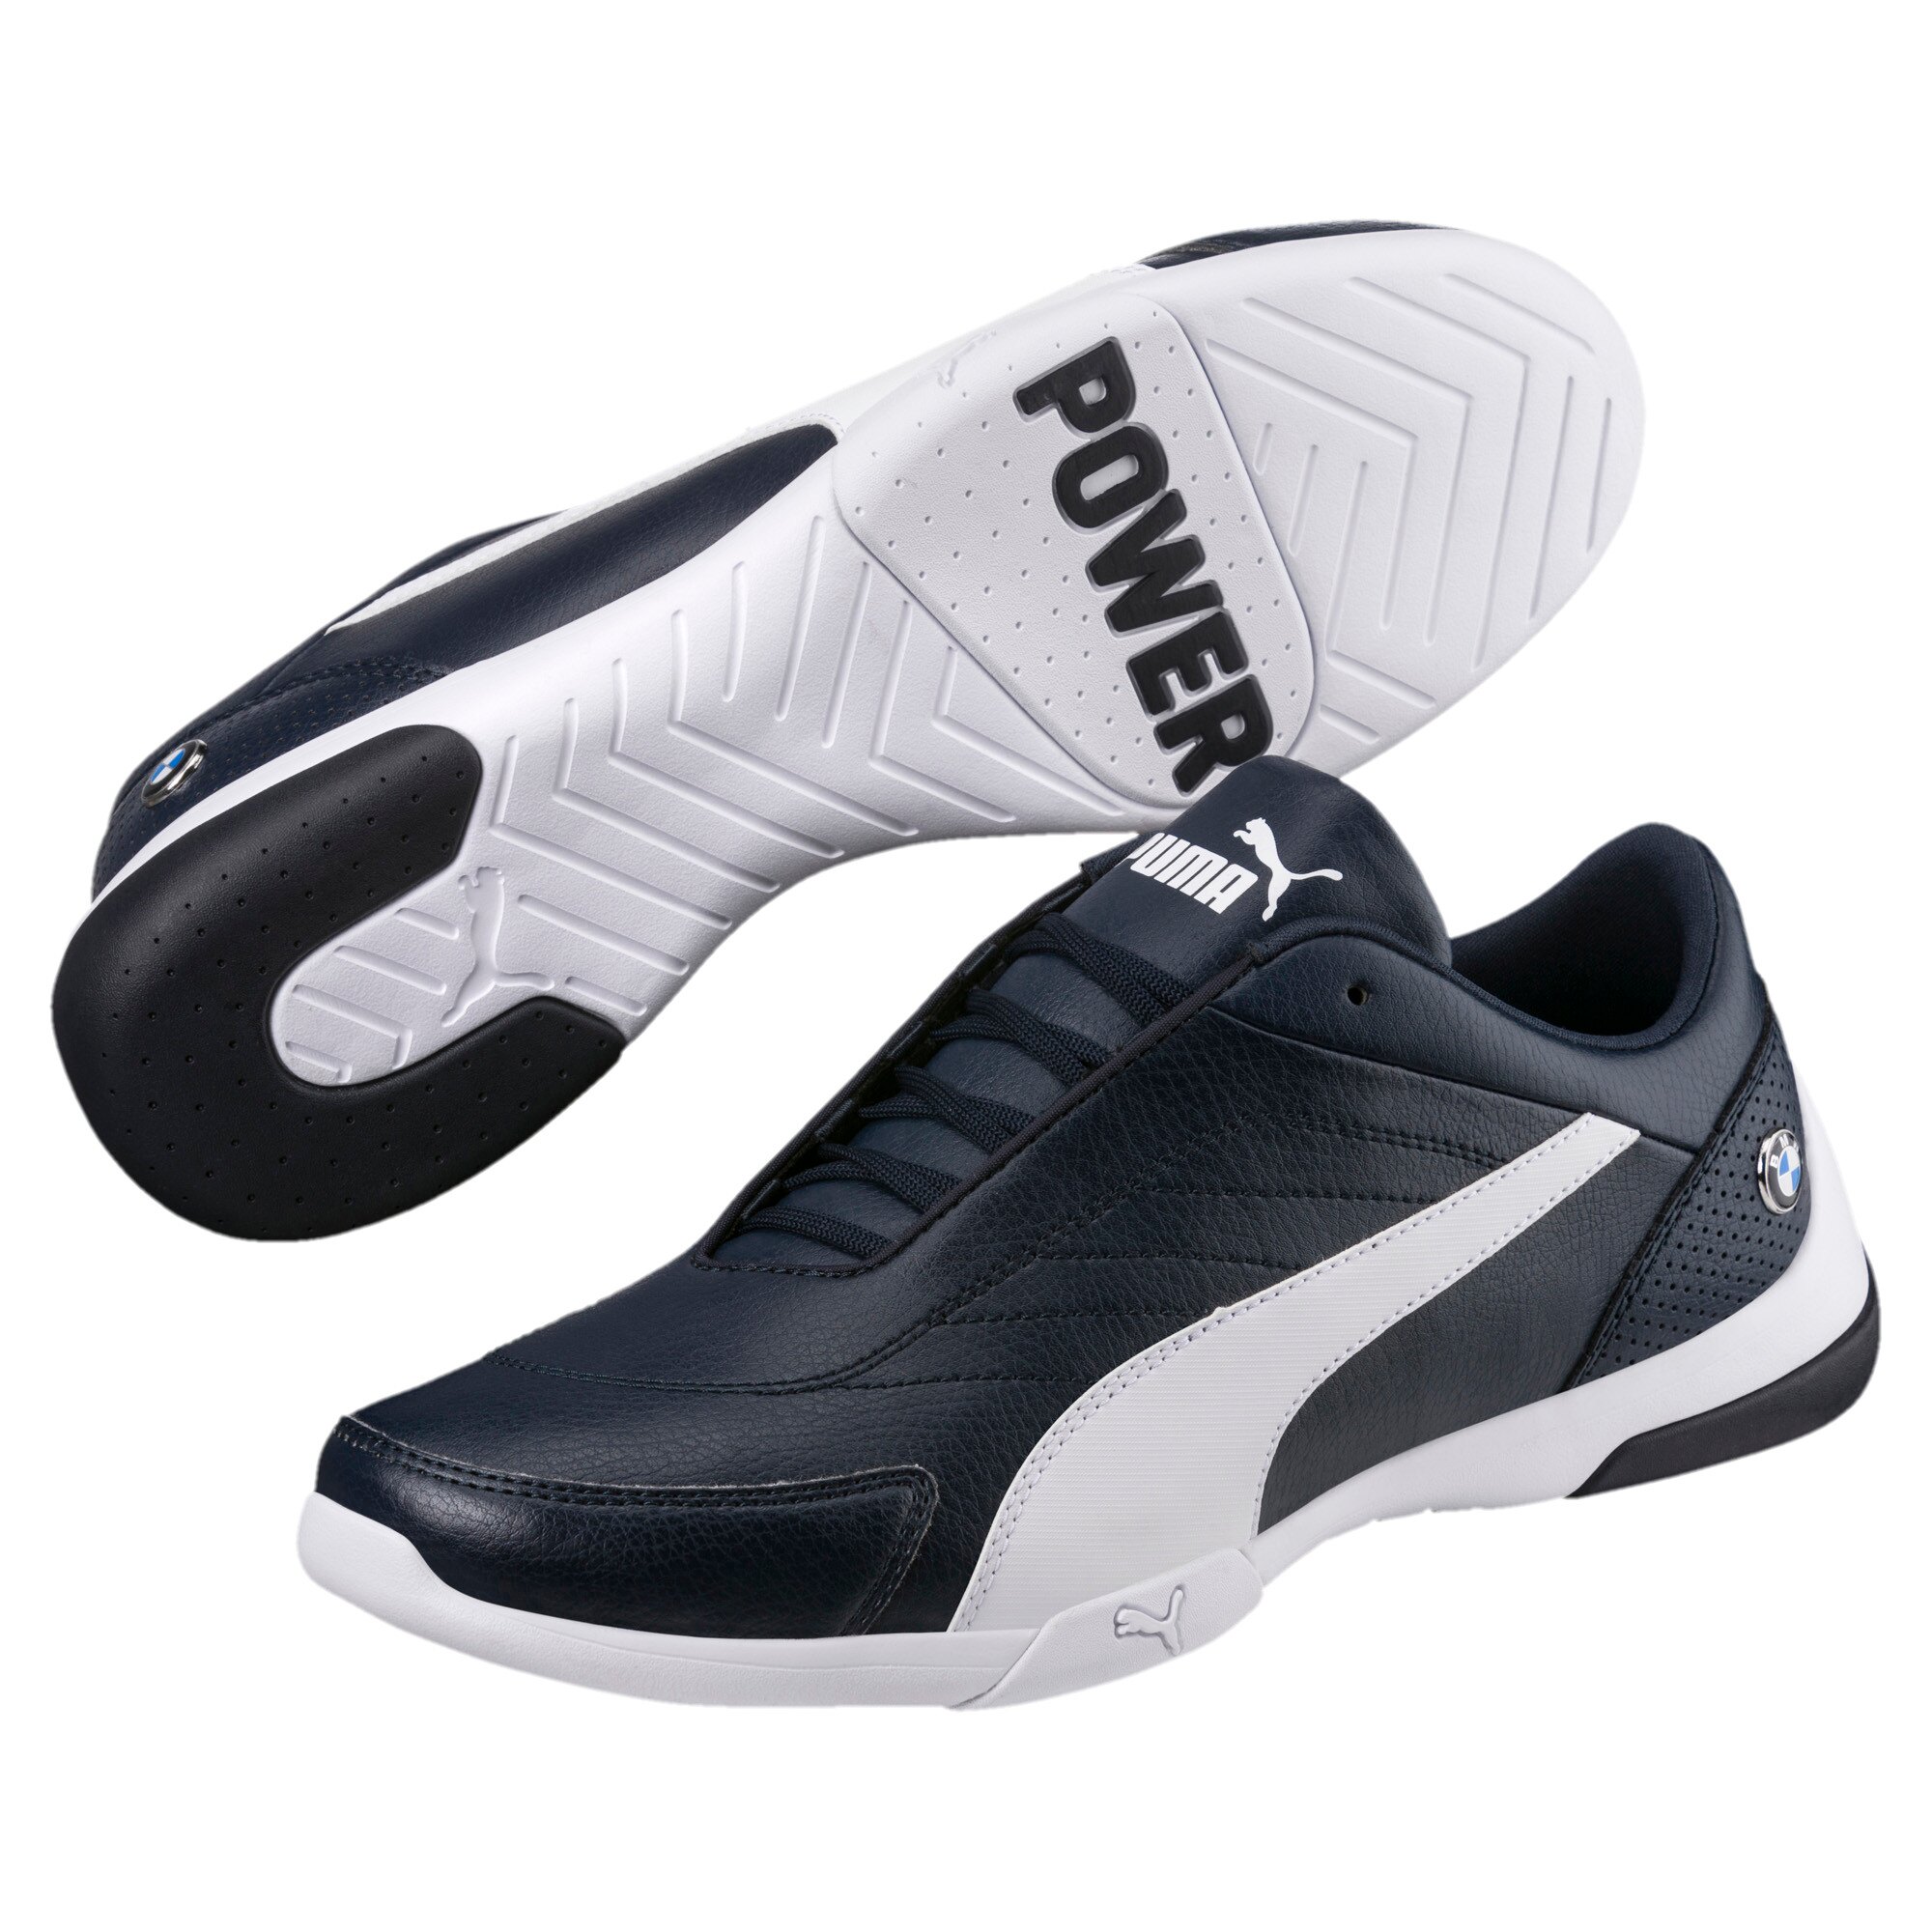 Puma BMW M Motorsport Kart Cat III Sneakers for $33.99 shipped from ...